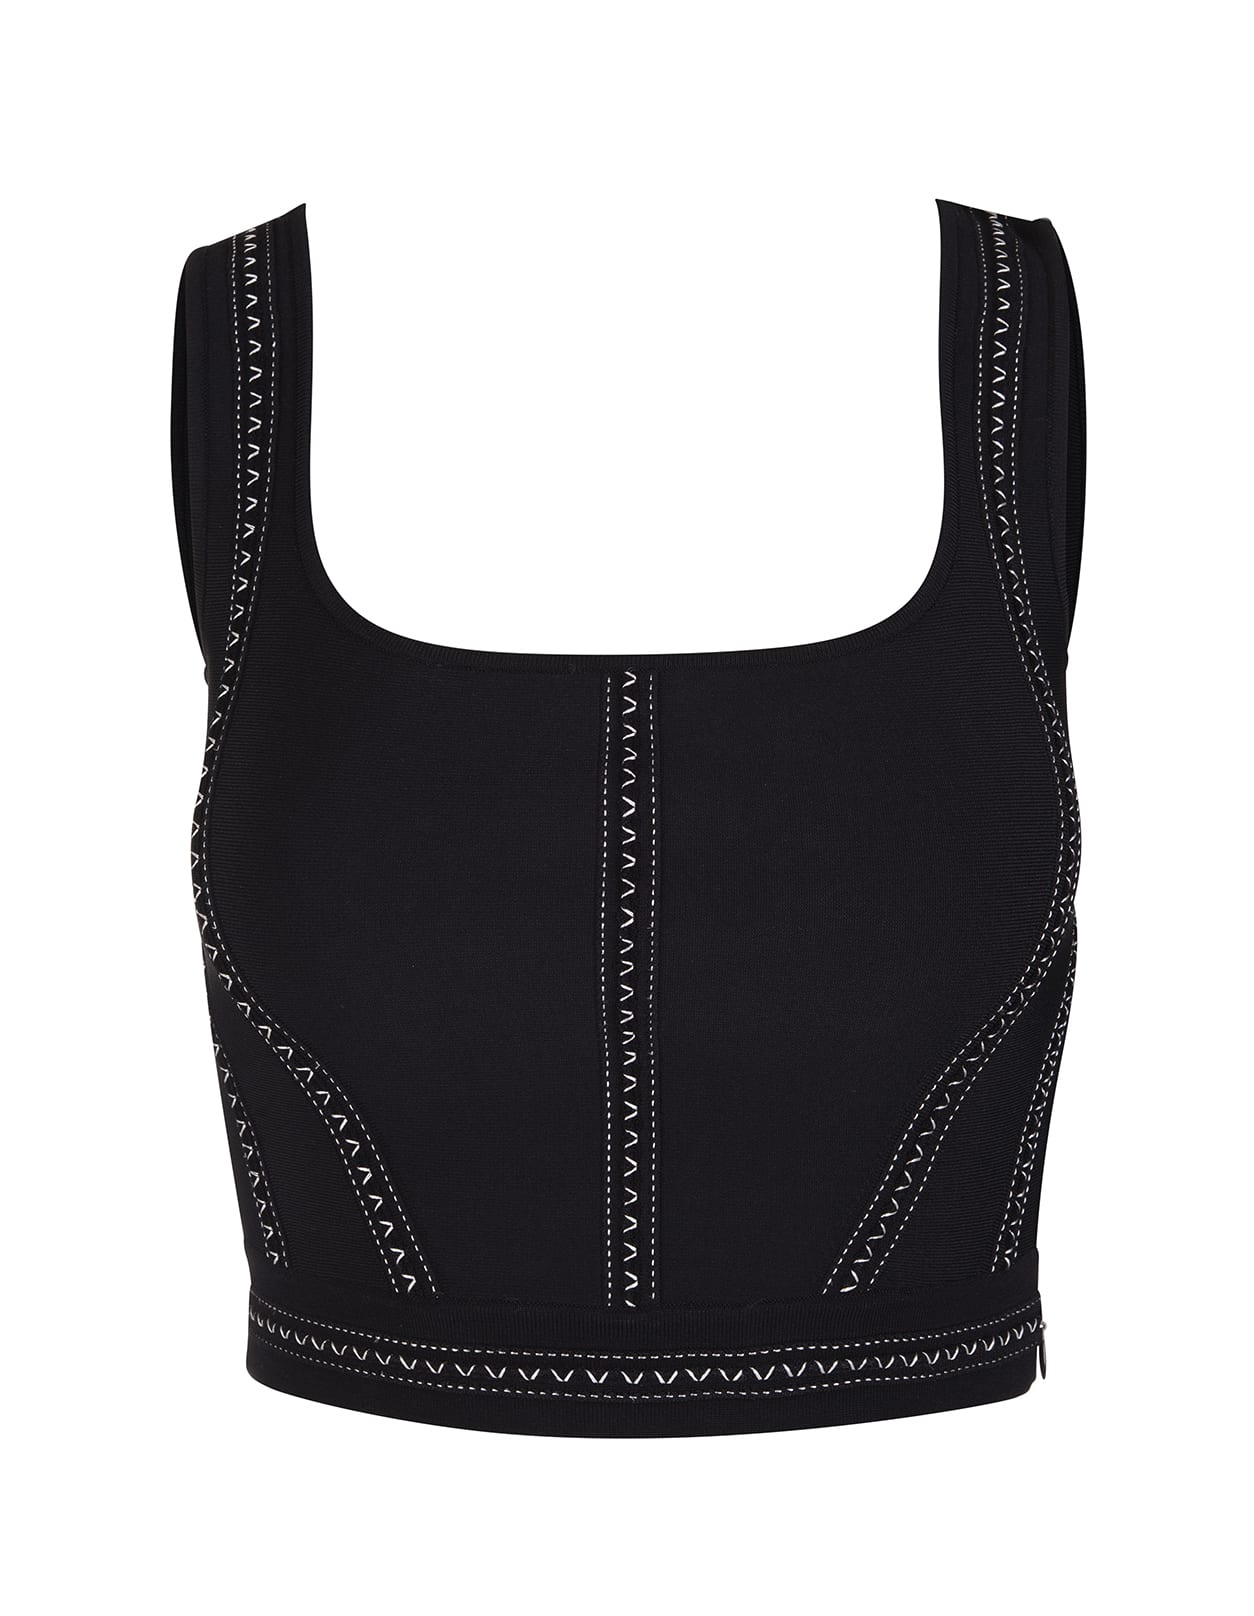 Alexander McQueen Woman Black Top With Contrast Stitching